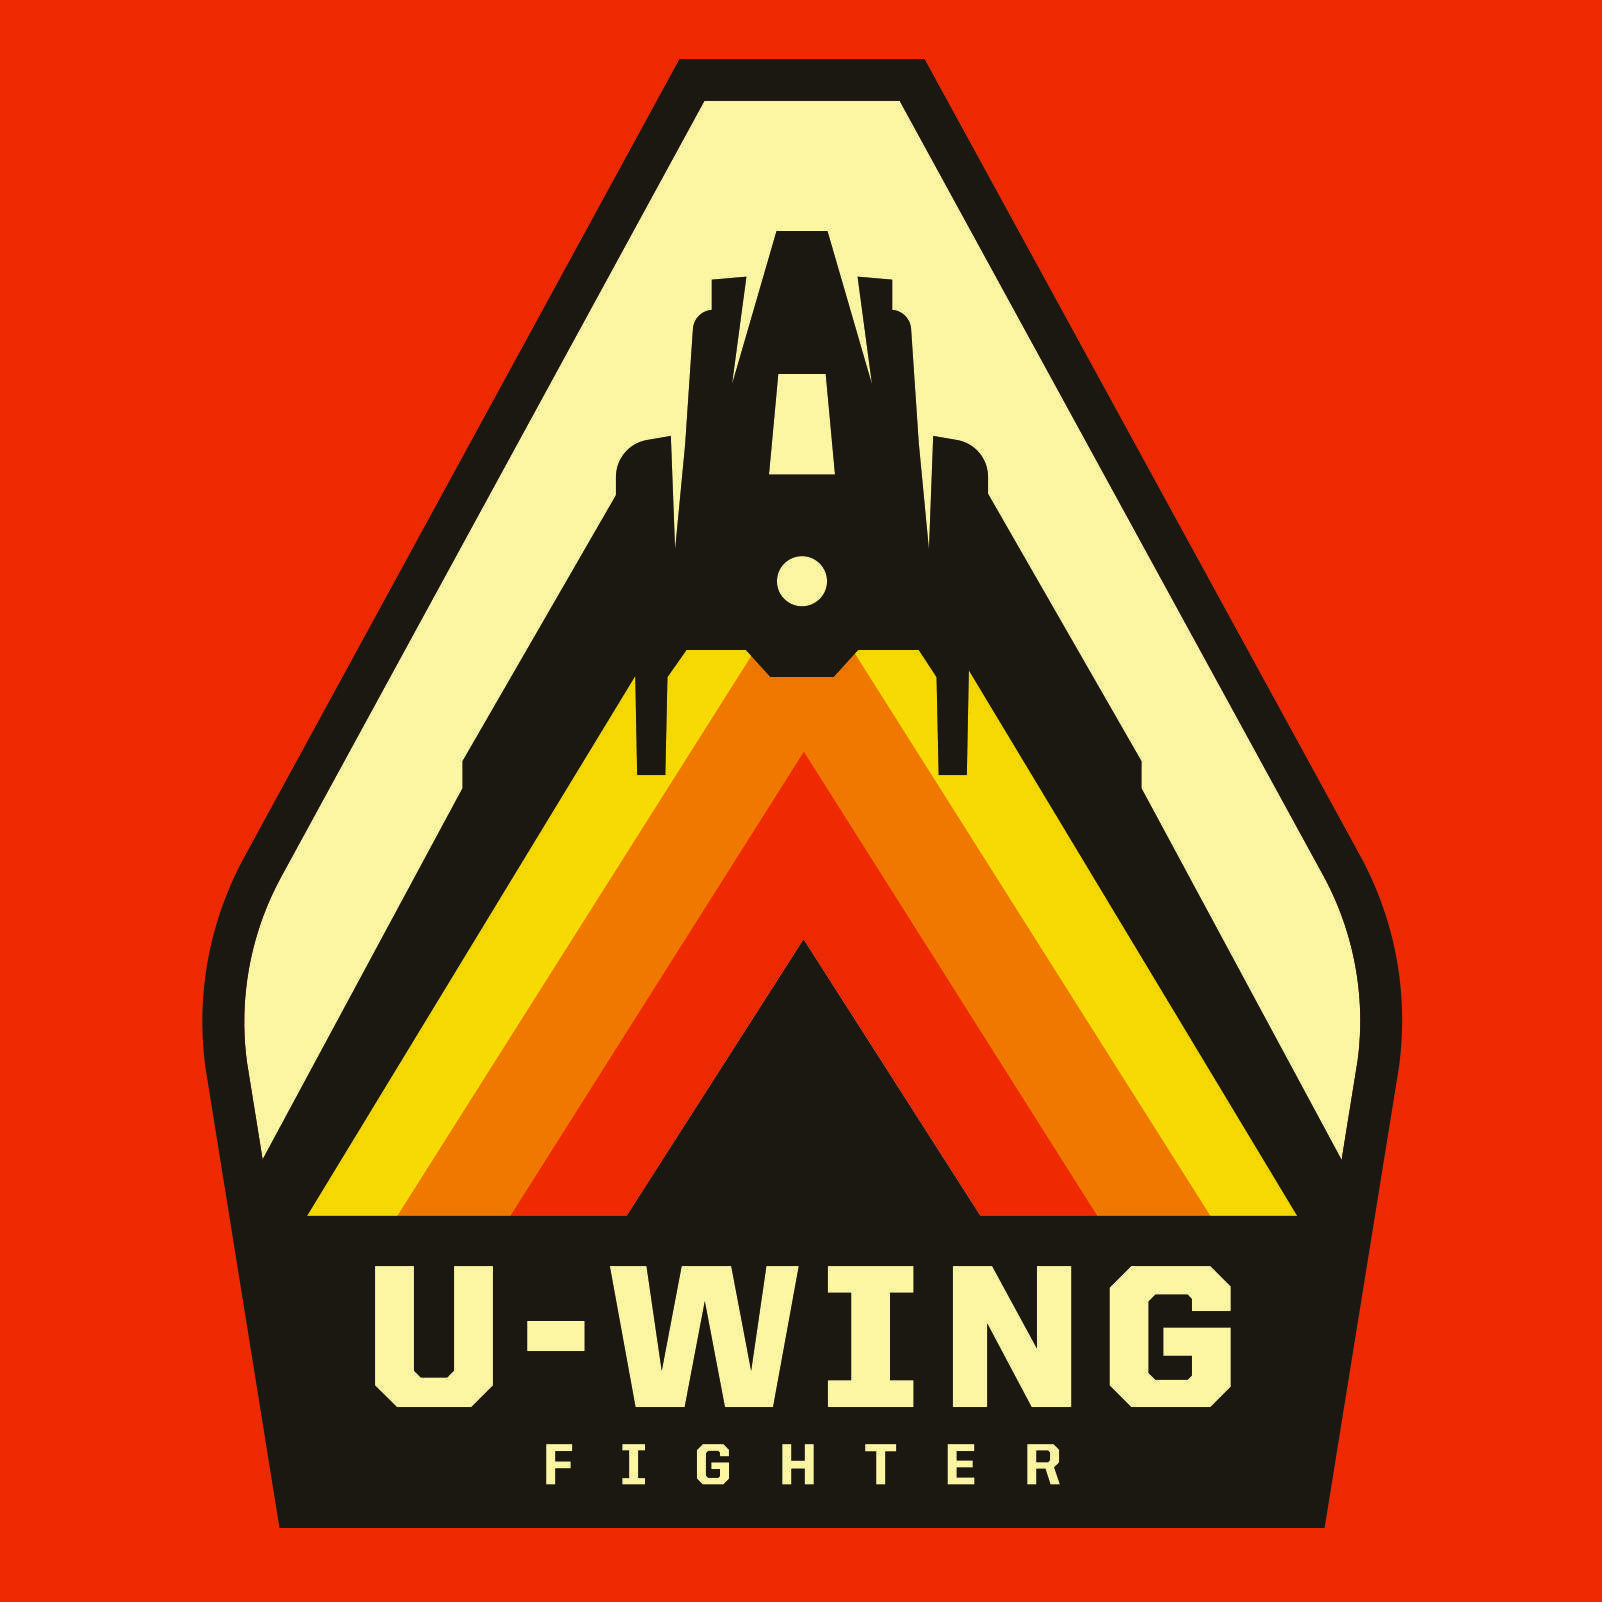 U Wing Logo - Star Wars Rogue One Art. U Wing In A Retro Design From Rogue One. Re